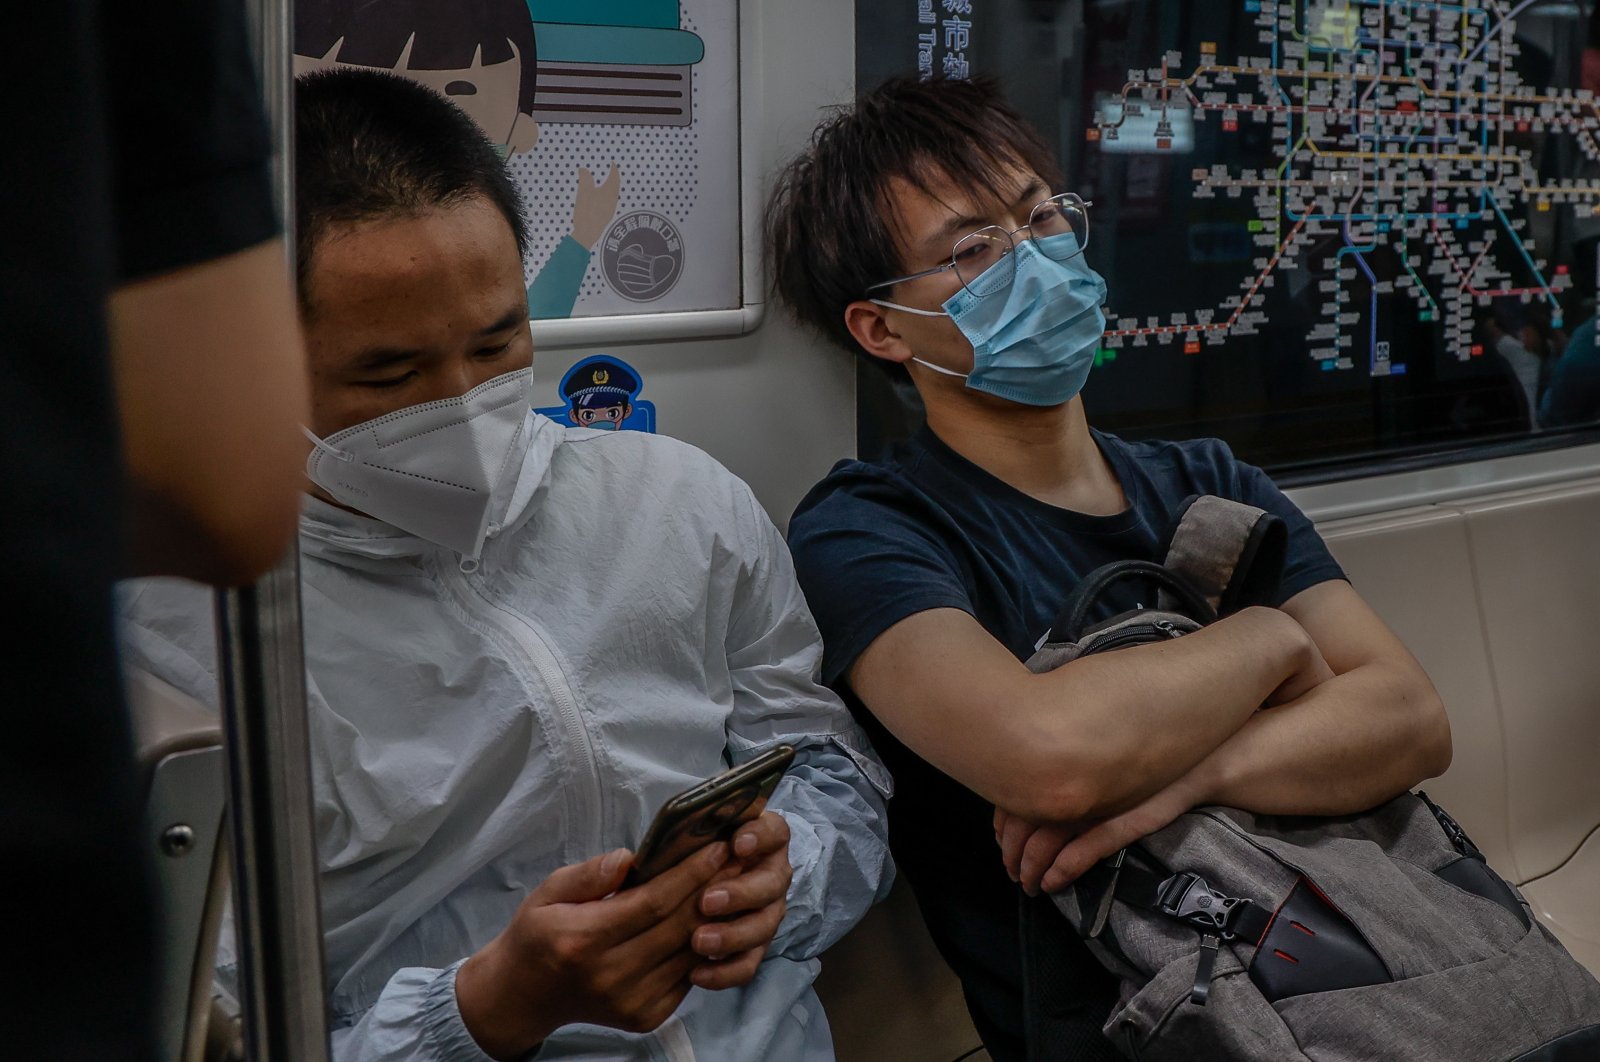 People ride a train in Beijing, China, May 30, 2022. (EPA Photo)